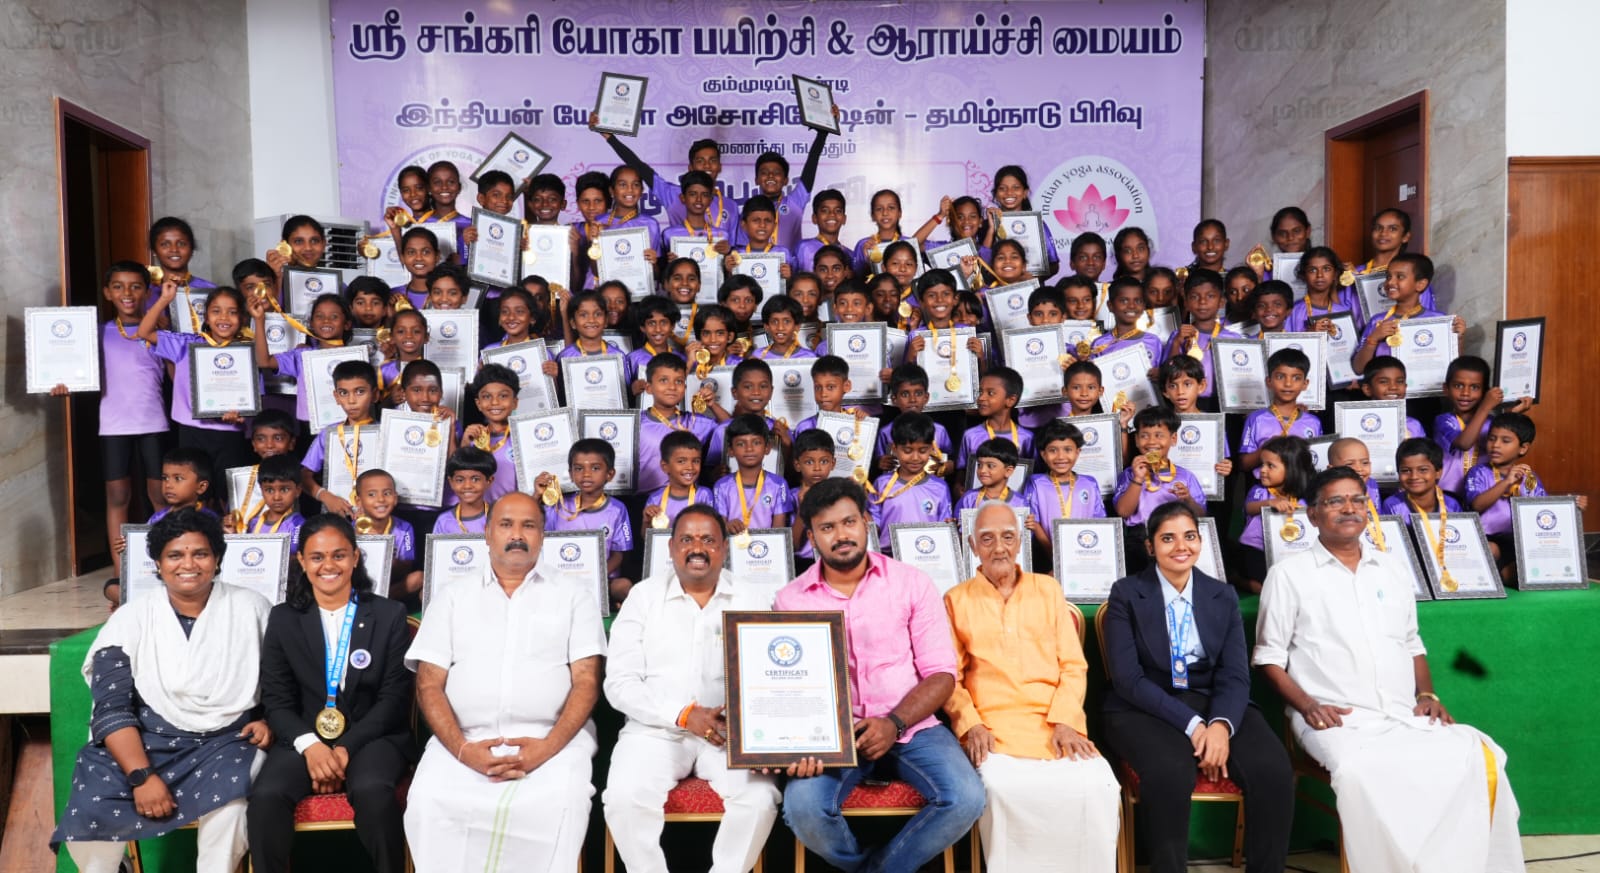 A world record with 85 students